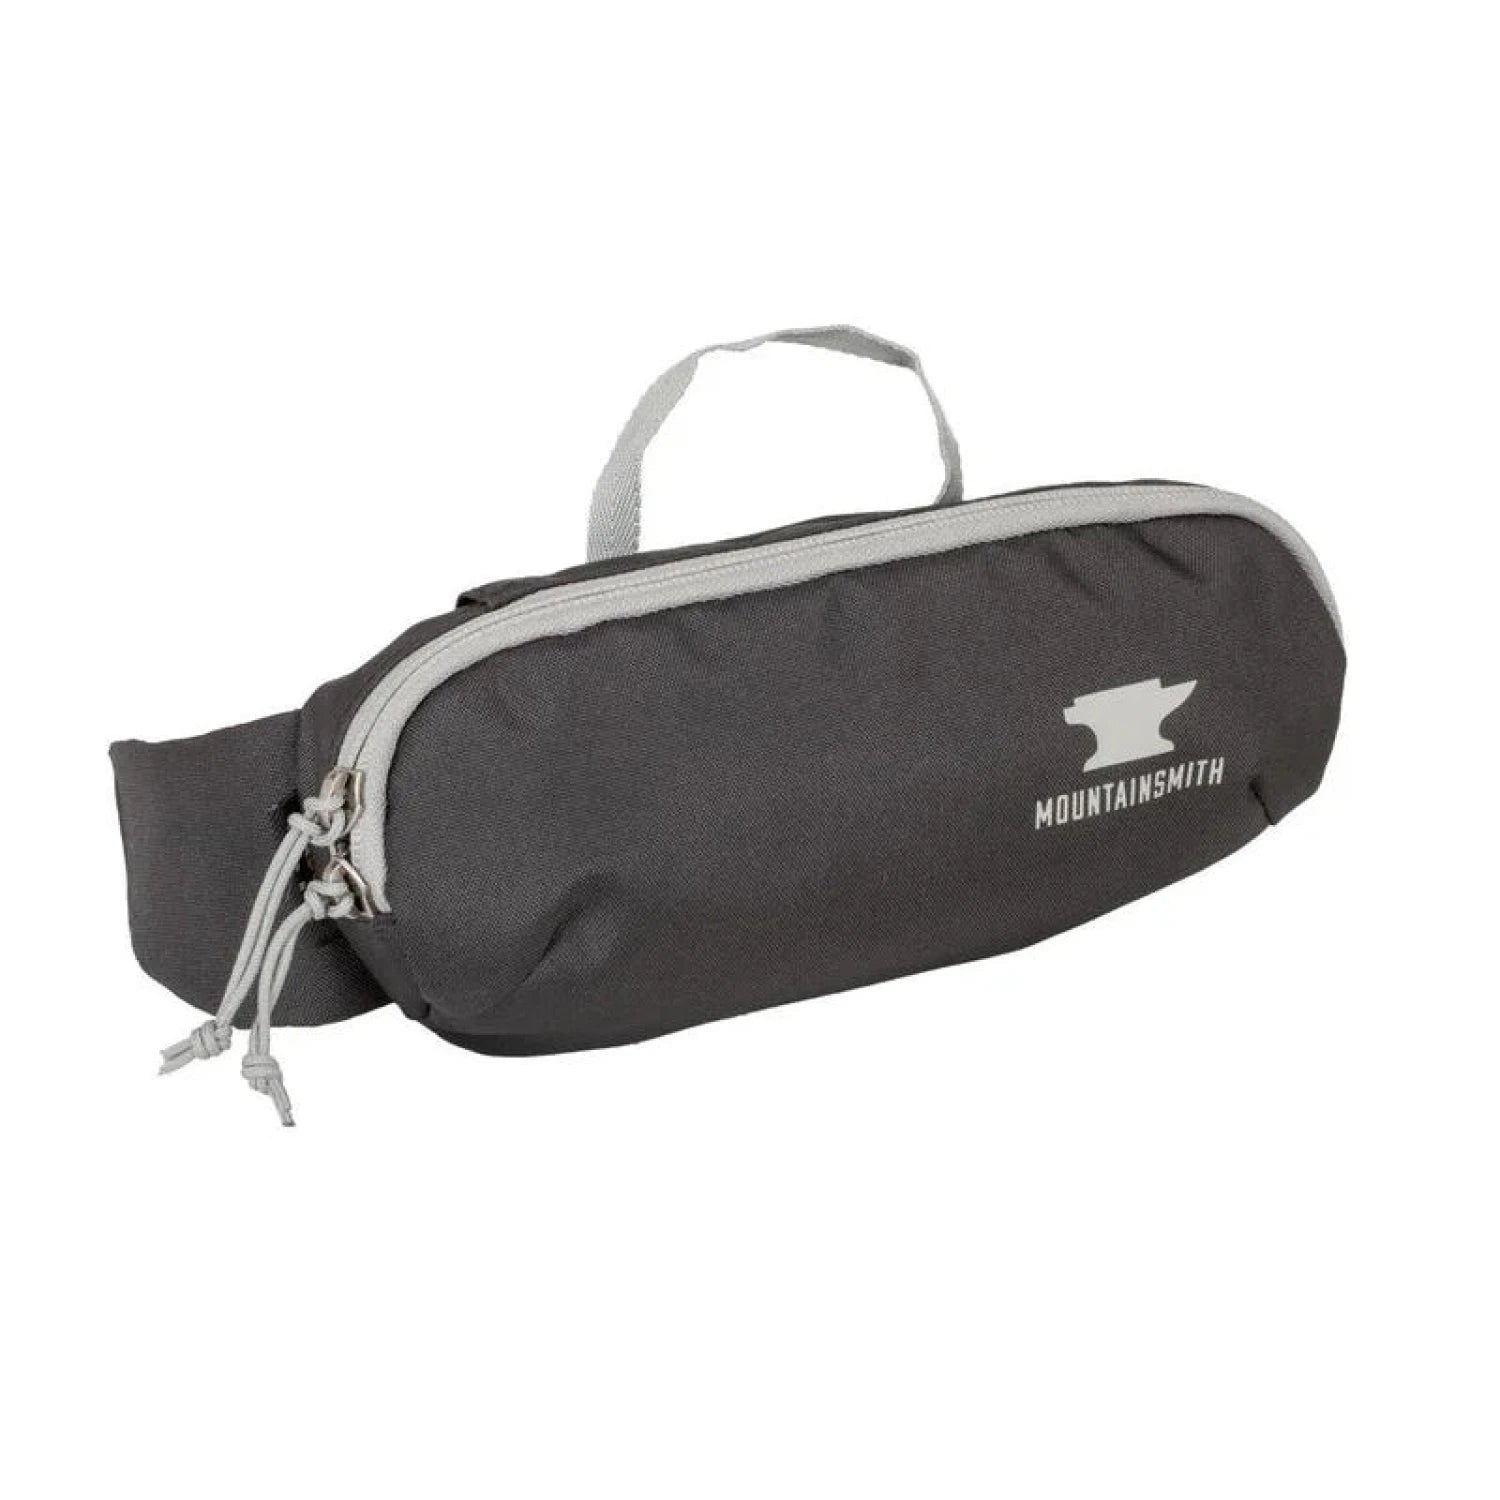 Mountainsmith Groove Hip Pack shown in the Heritage Black color option.